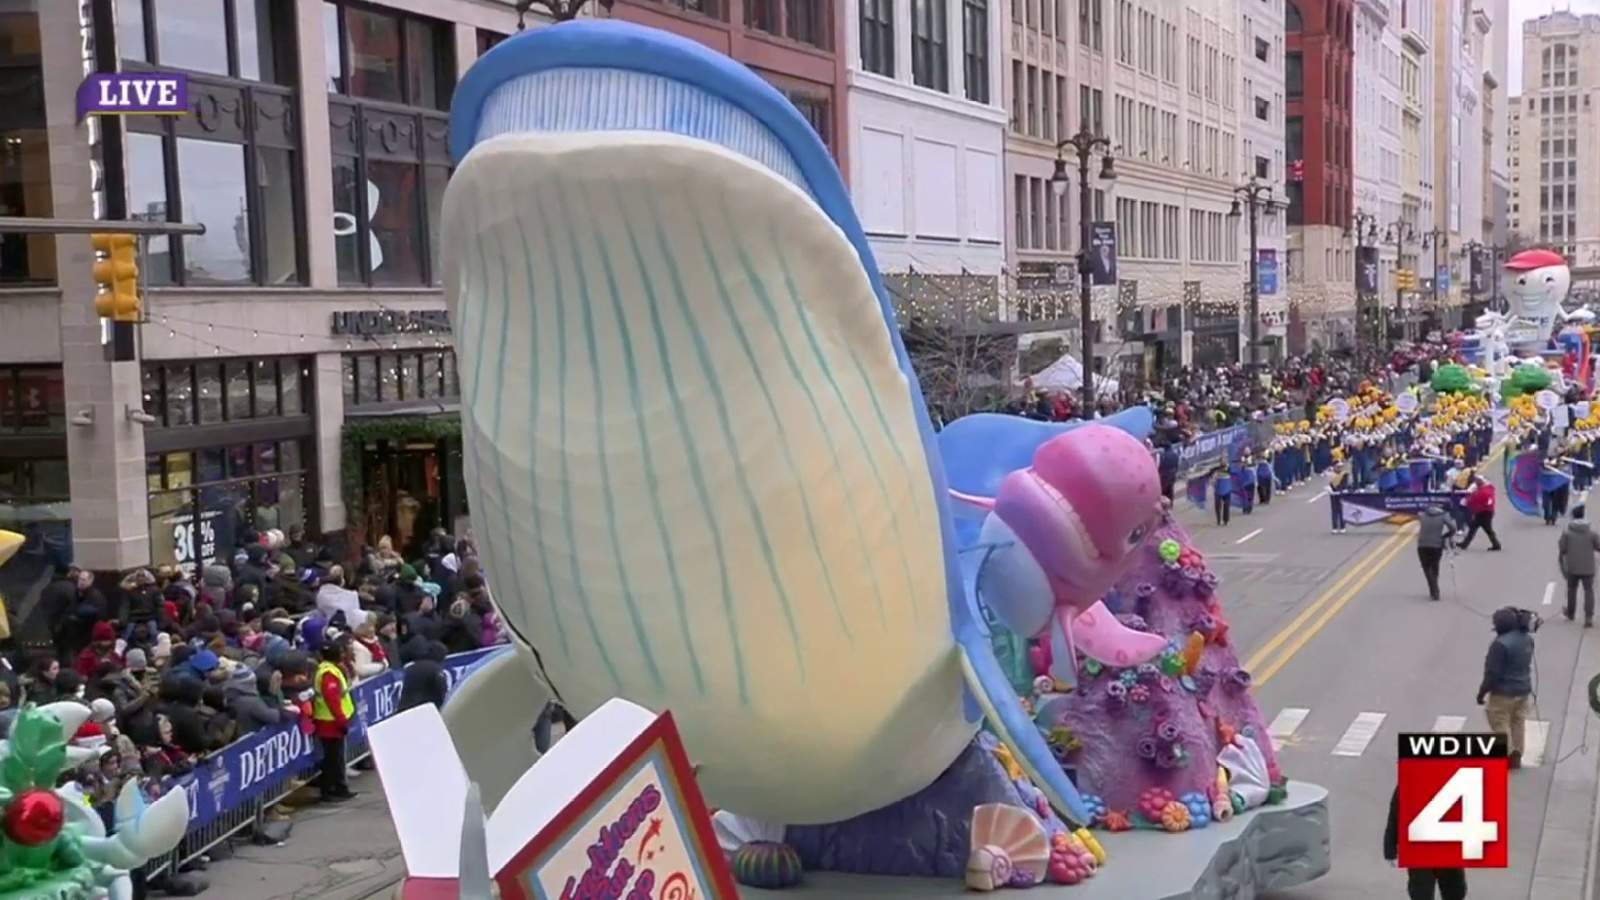 New ‘Christmas Under the Sea’ float debuts at 2019 America’s Thanksgiving Parade in Detroit